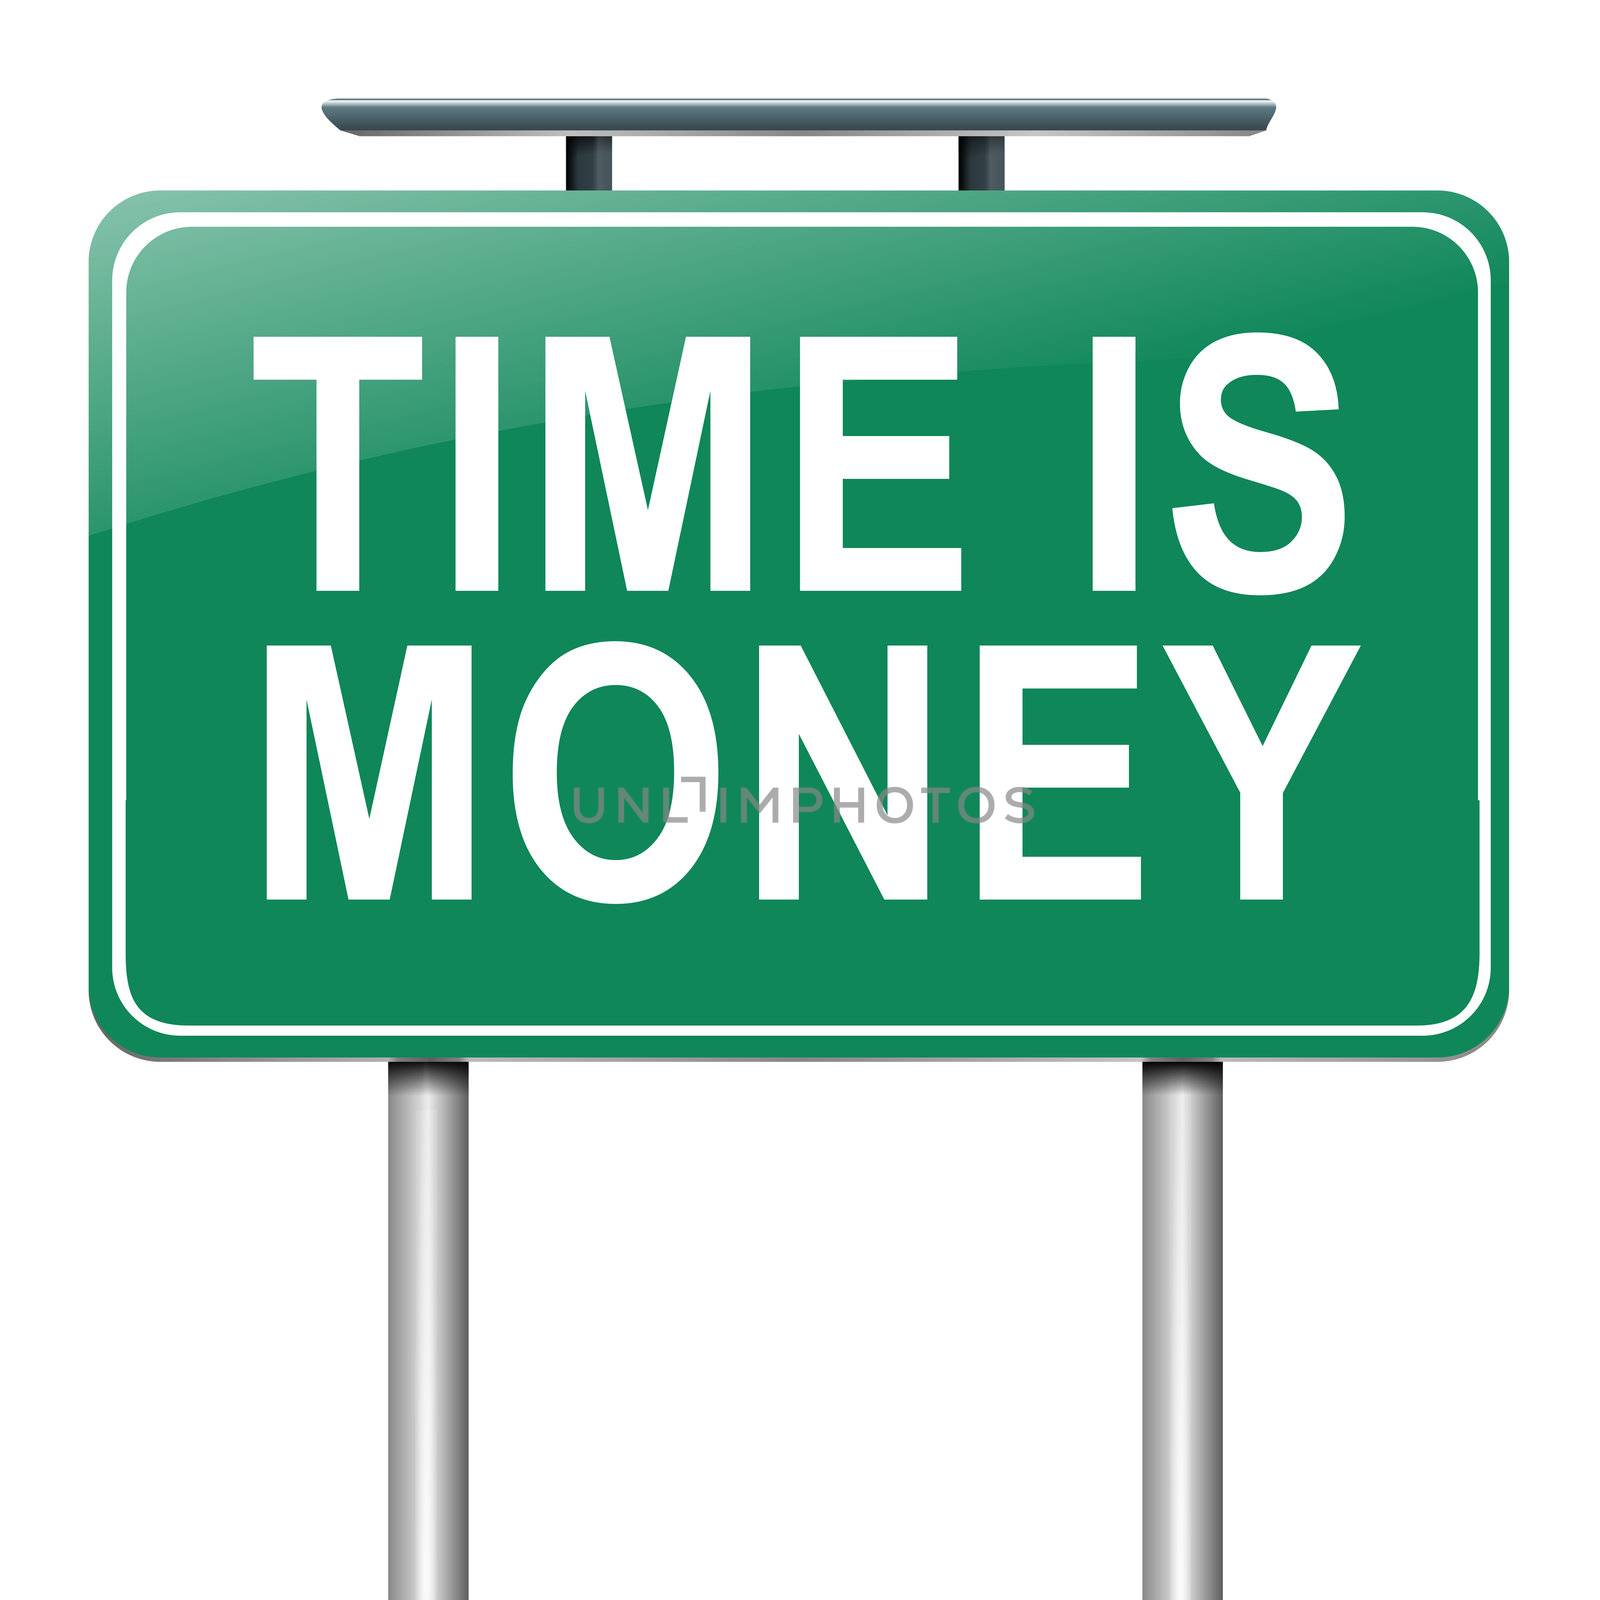 Illustration depicting a roadsign with a time is money concept. White background.